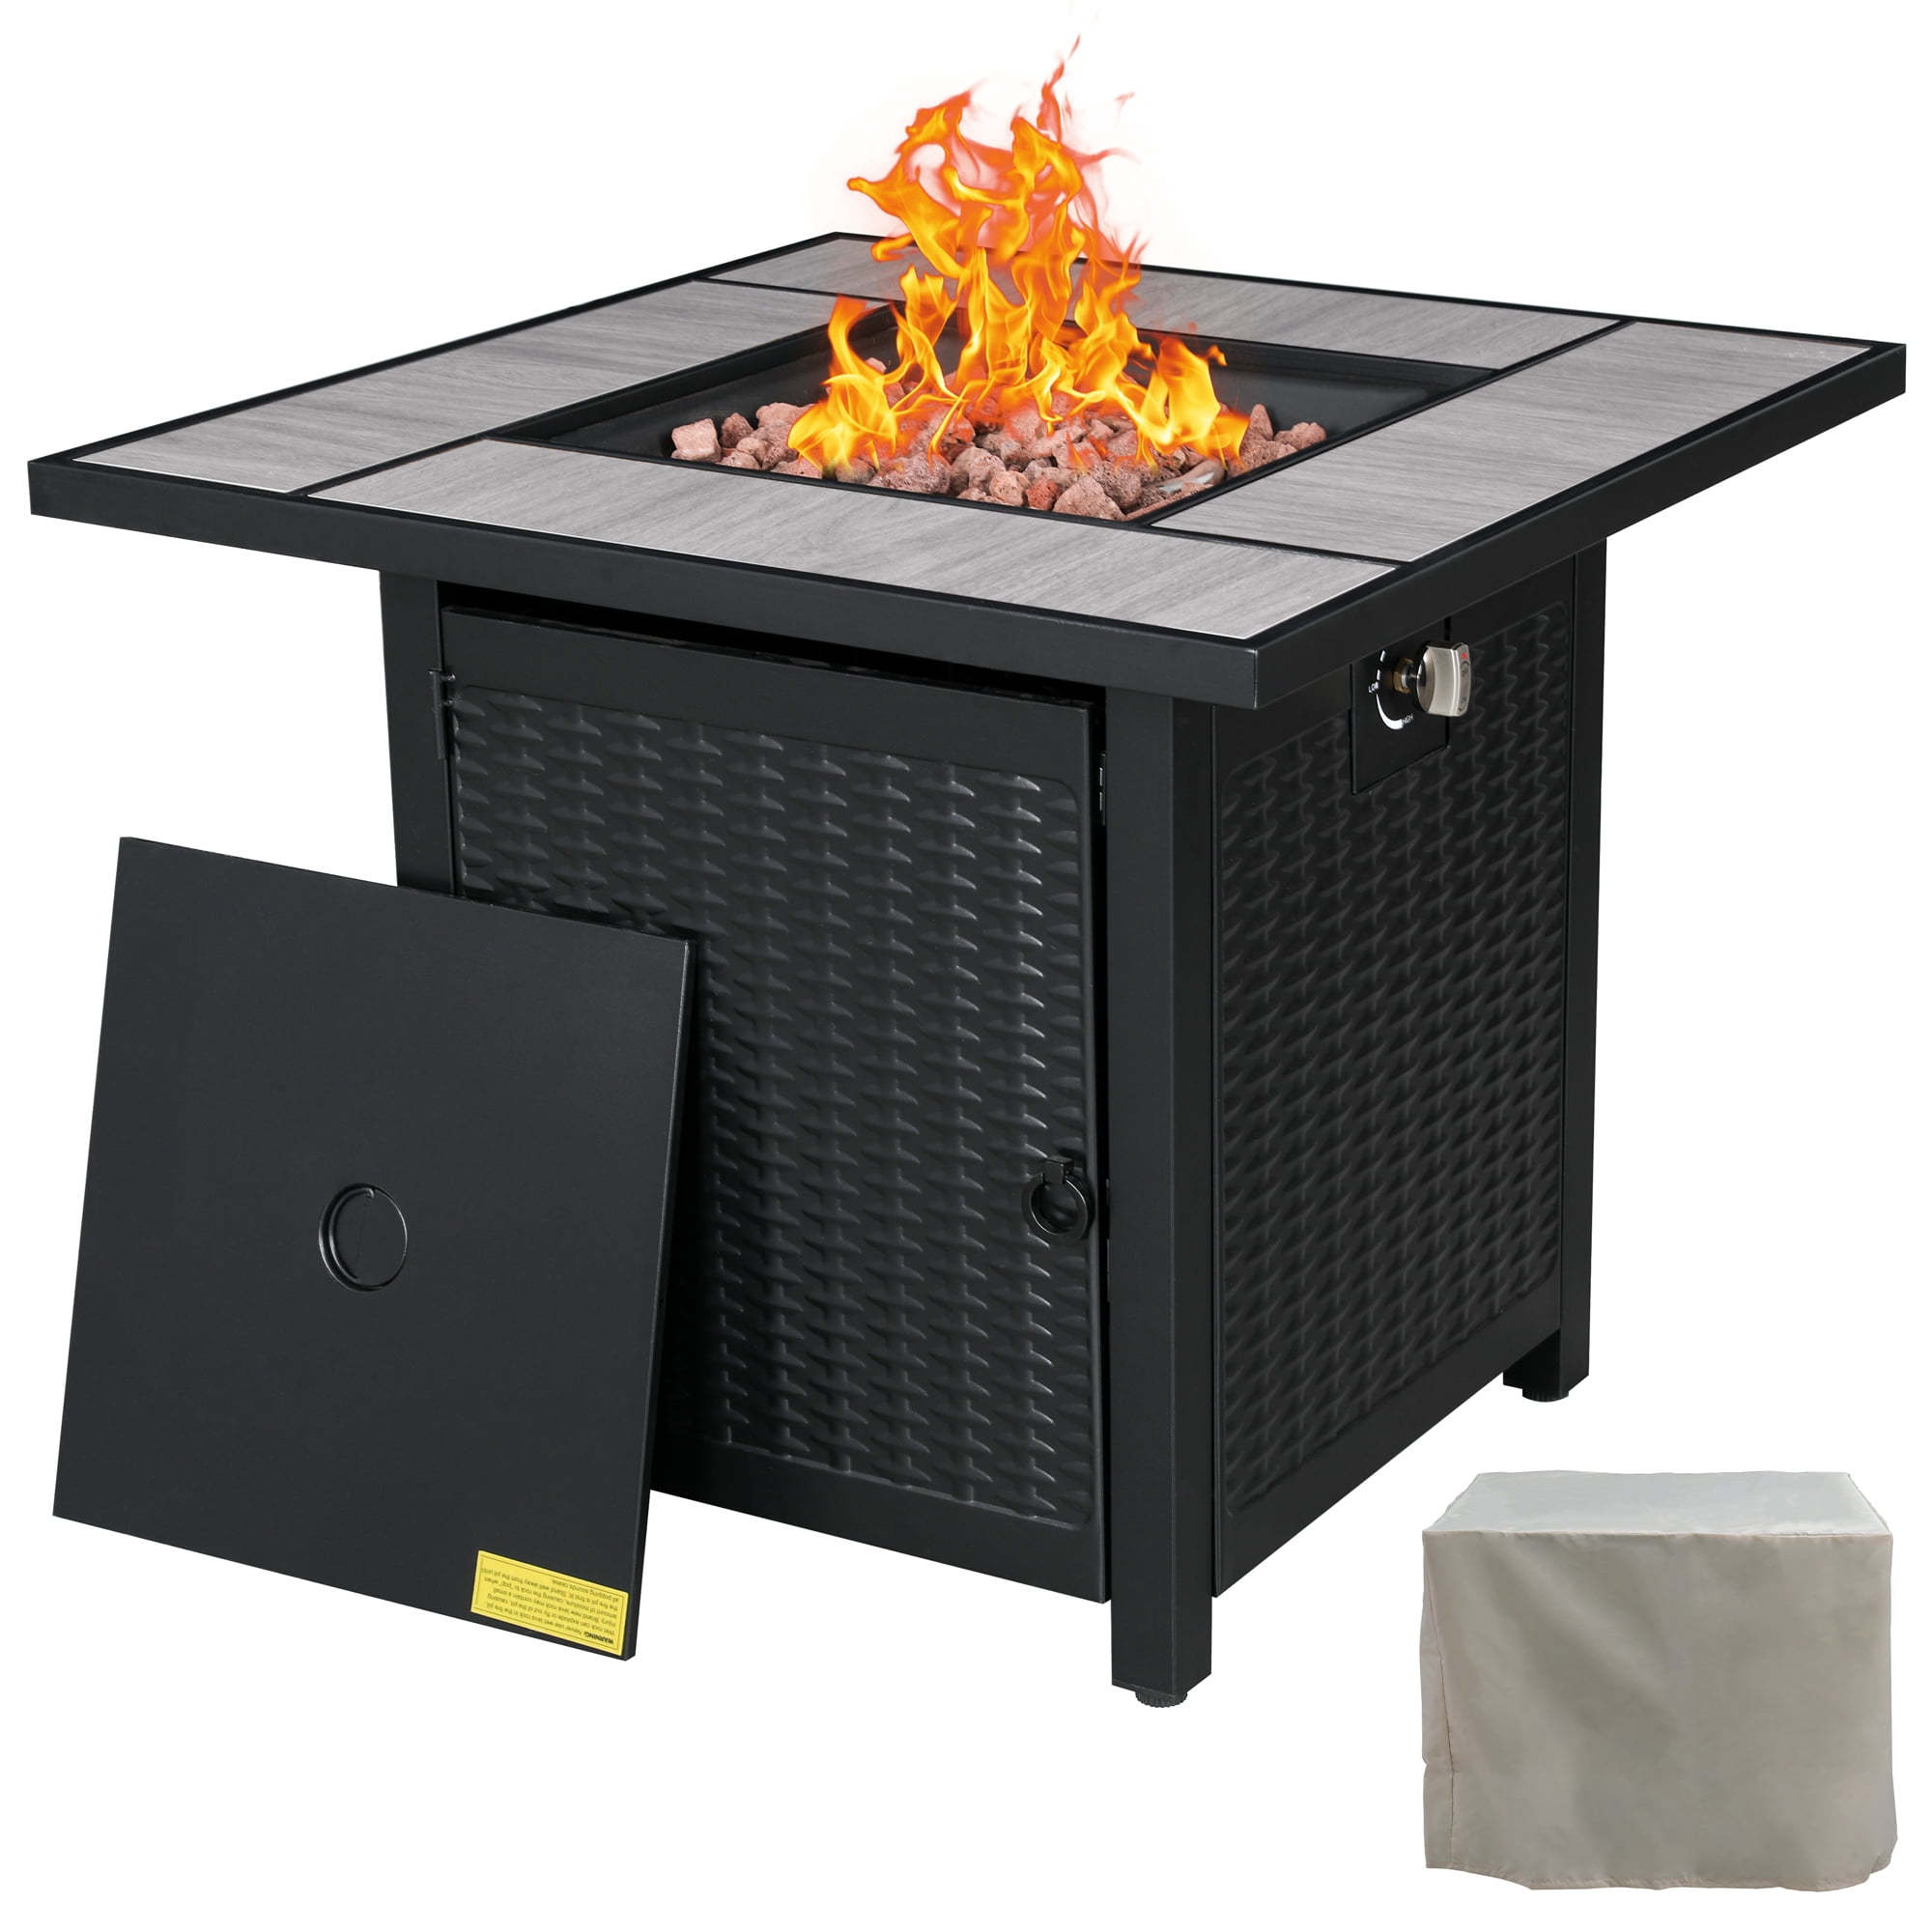 Walsunny 30" Propane Gas Fire Pit Table 50,000 BTU Square Outdoor Wicker Grey - image 1 of 9